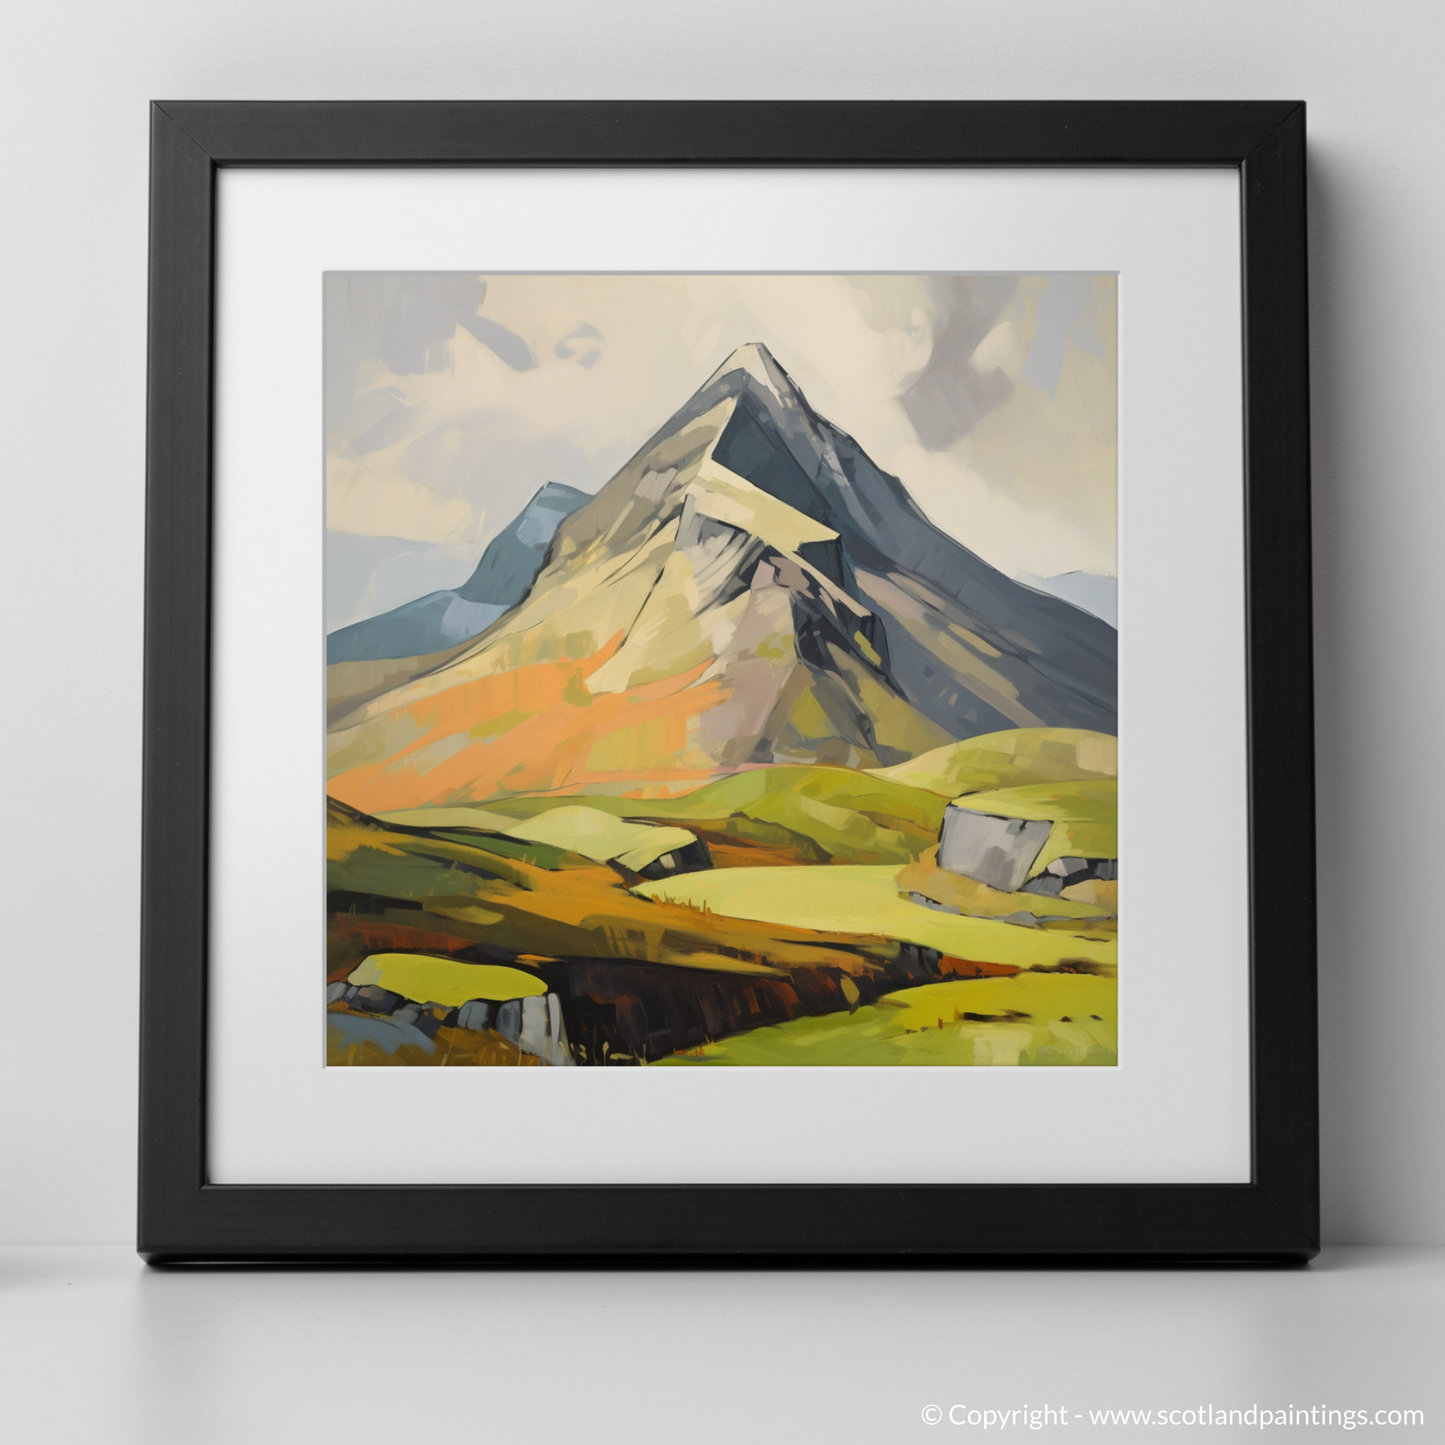 Art Print of A mountain in Scotland with a black frame